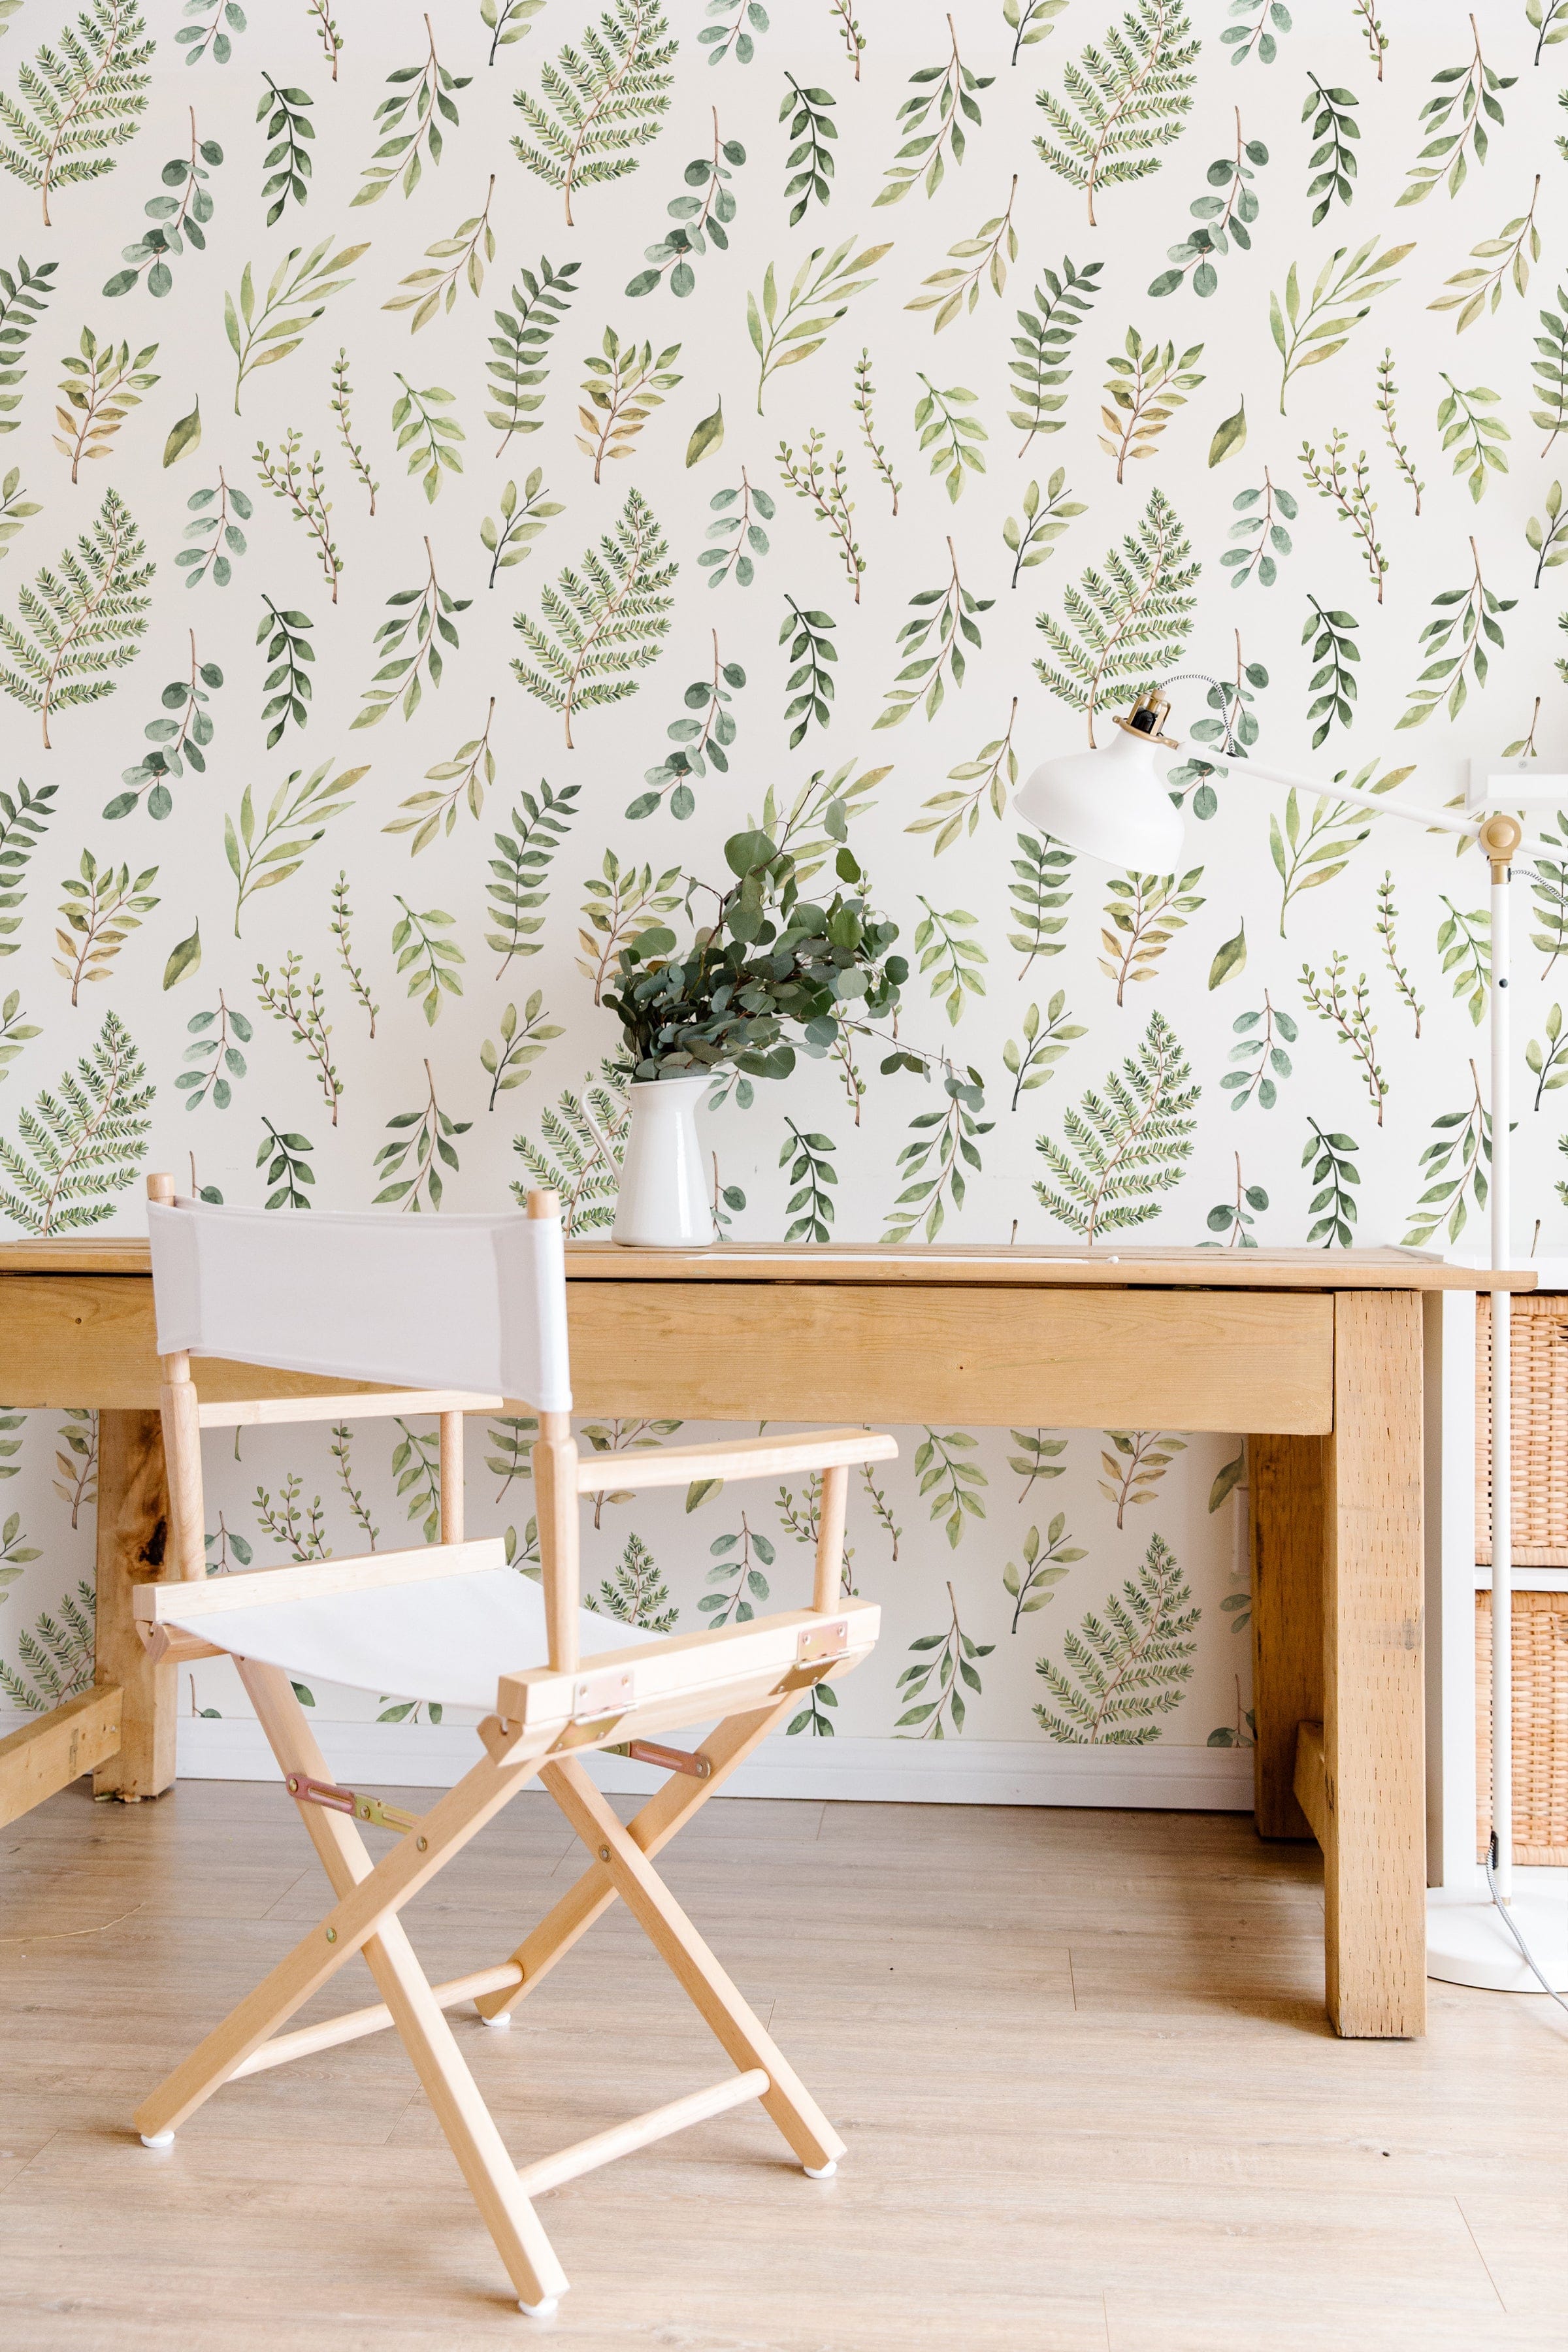 A stylish home office setup featuring Green Foliage Wallpaper with hand-drawn green leaves and branches on a white background, complemented by a wooden desk, a white chair, and a vase of greenery.